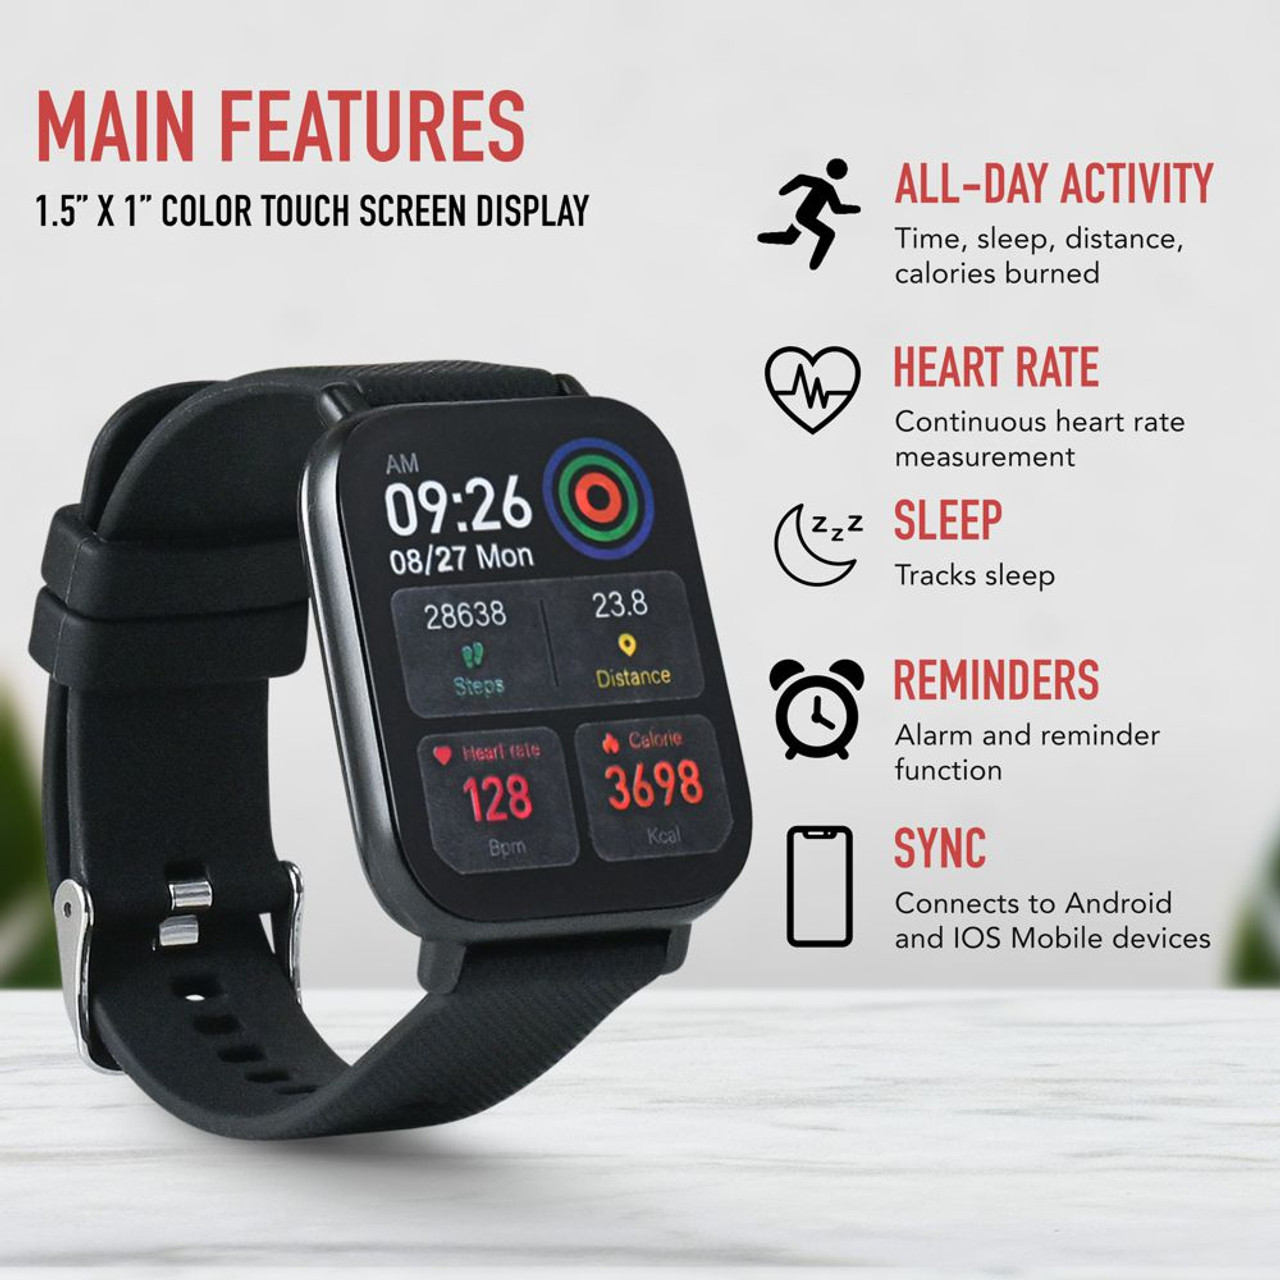 Fastrack Limitless FS1: Fastrack launches FS1 smartwatch with Bluetooth  calling in India at Rs 1,995, ET Telecom